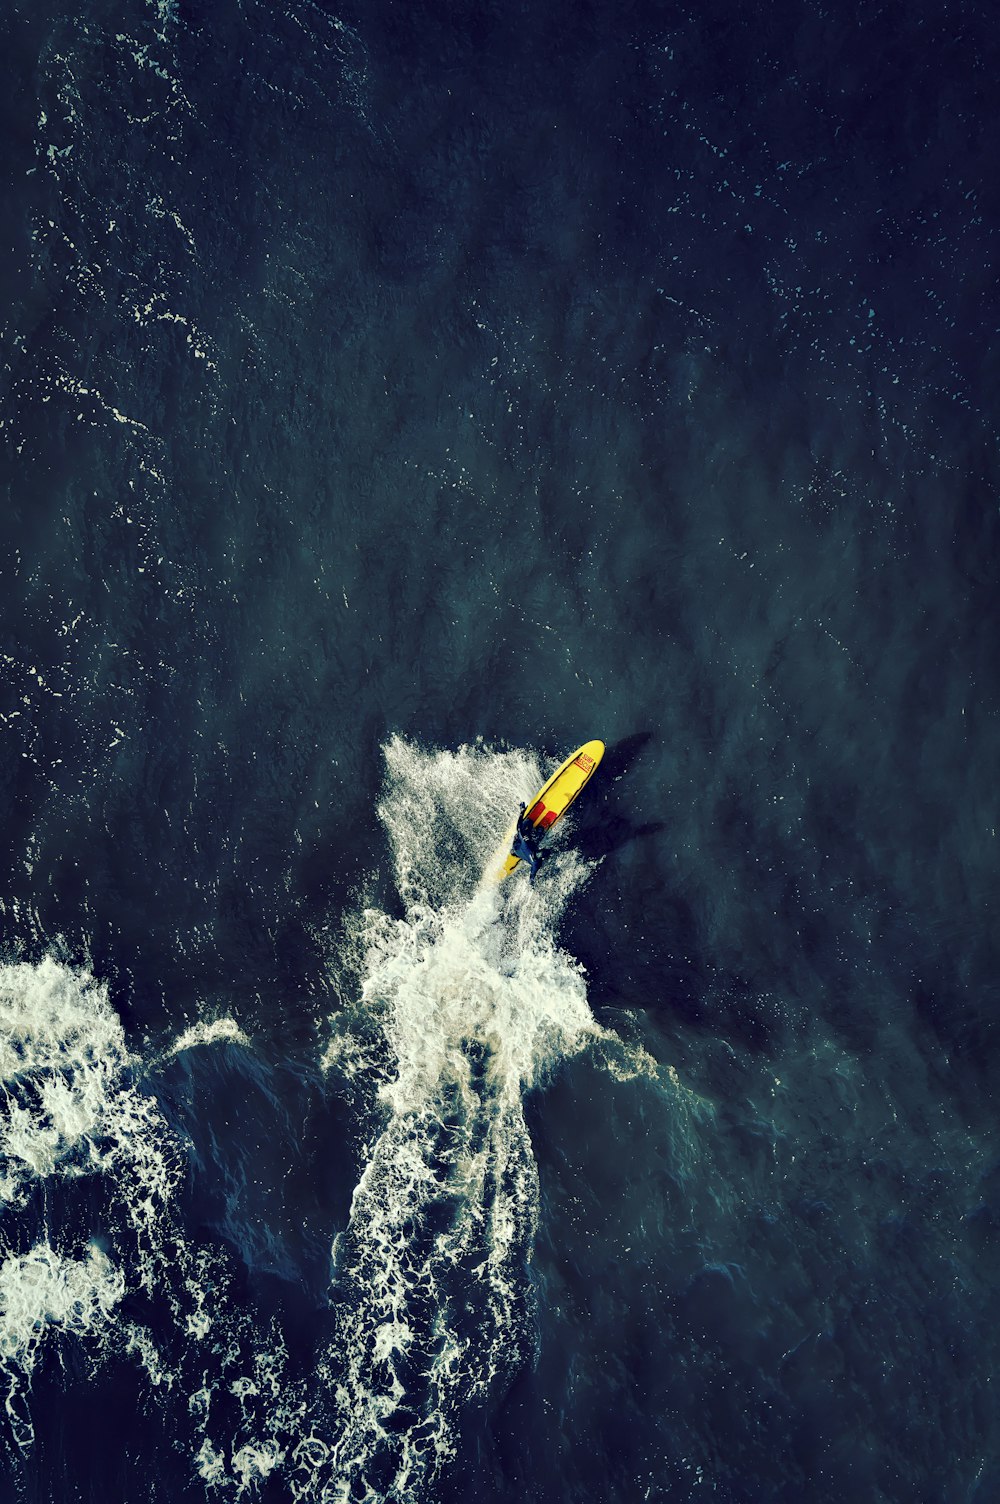 a yellow kayak in the middle of the ocean